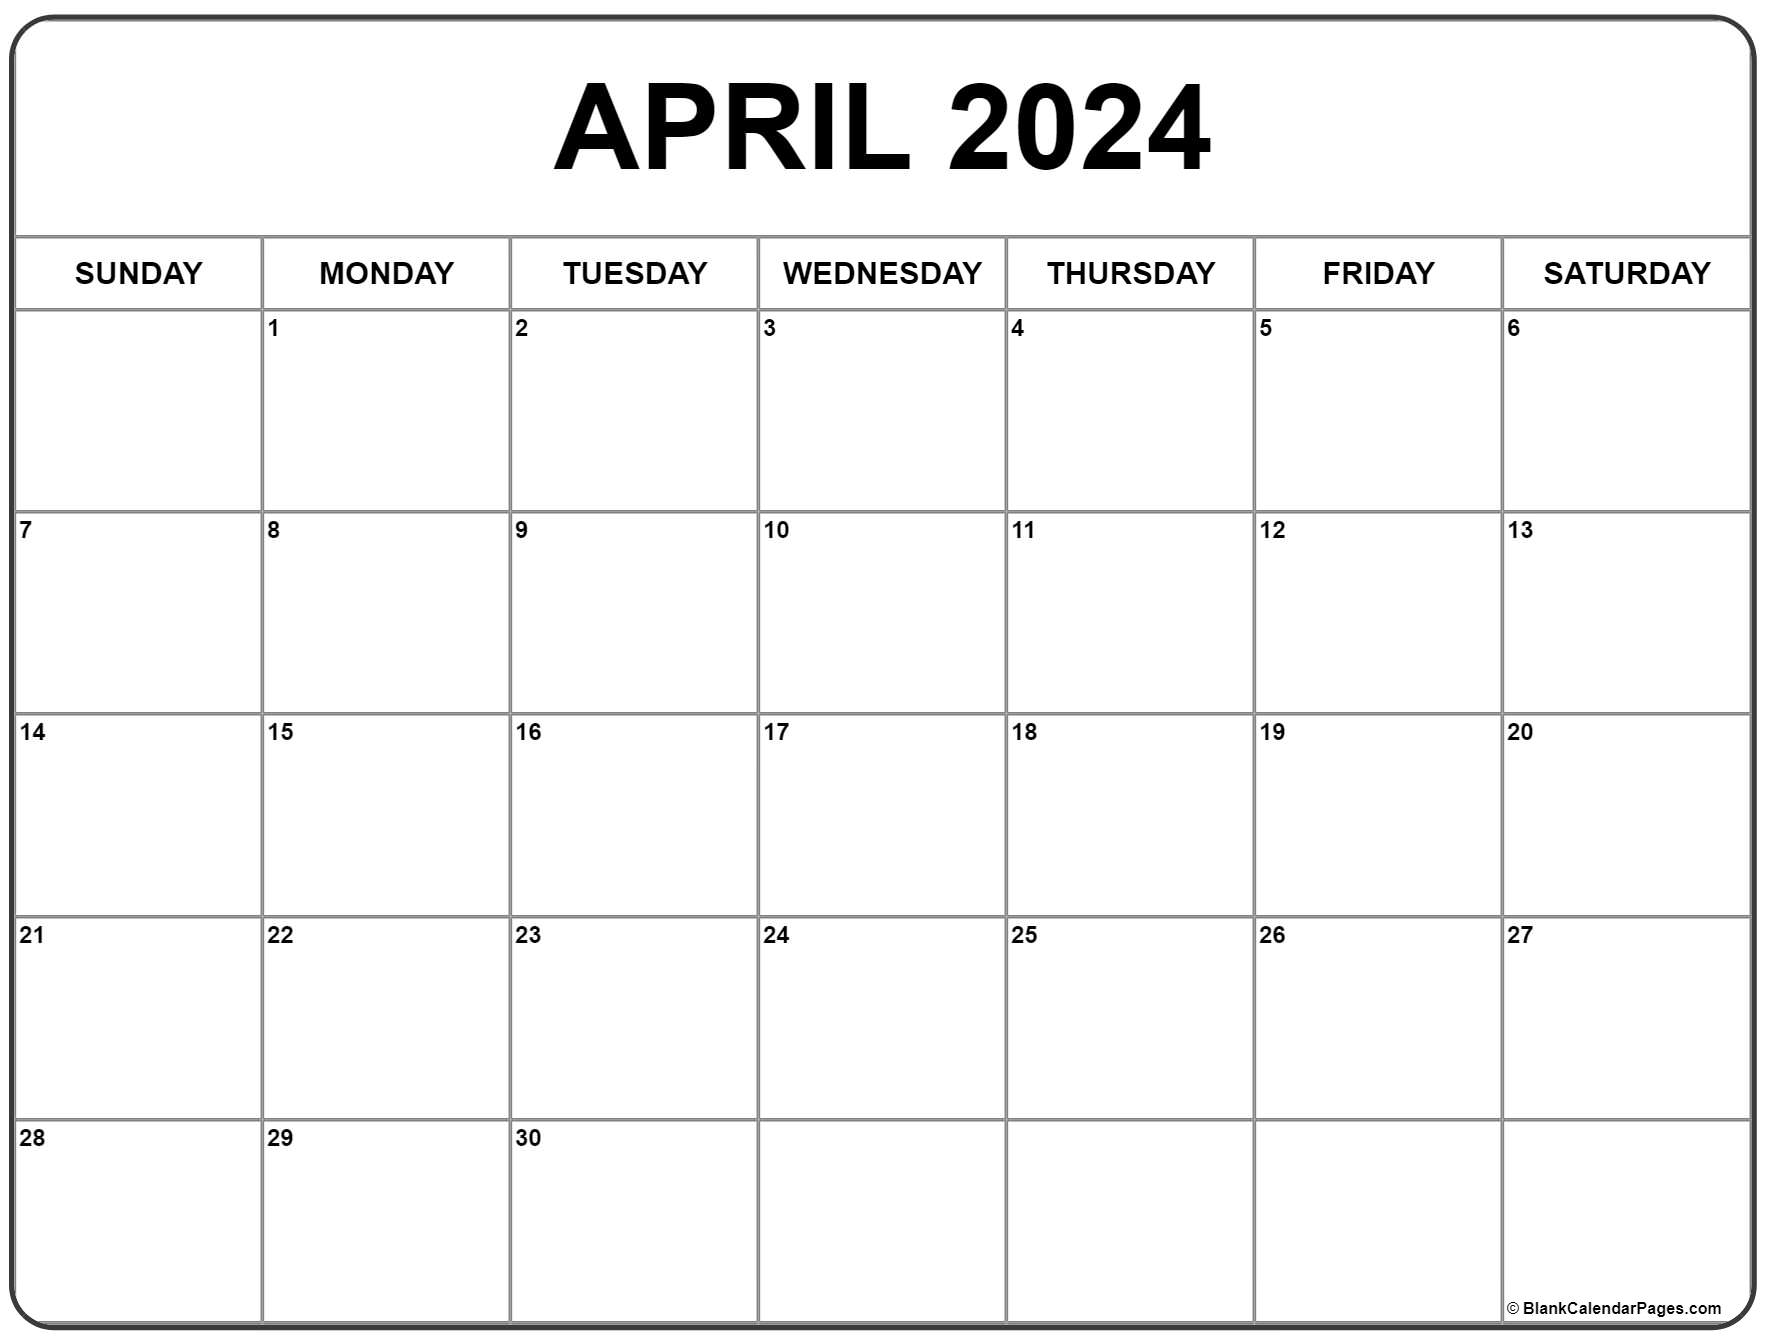 What Day Does April 1st Fall On 2024 Marjy Shannen